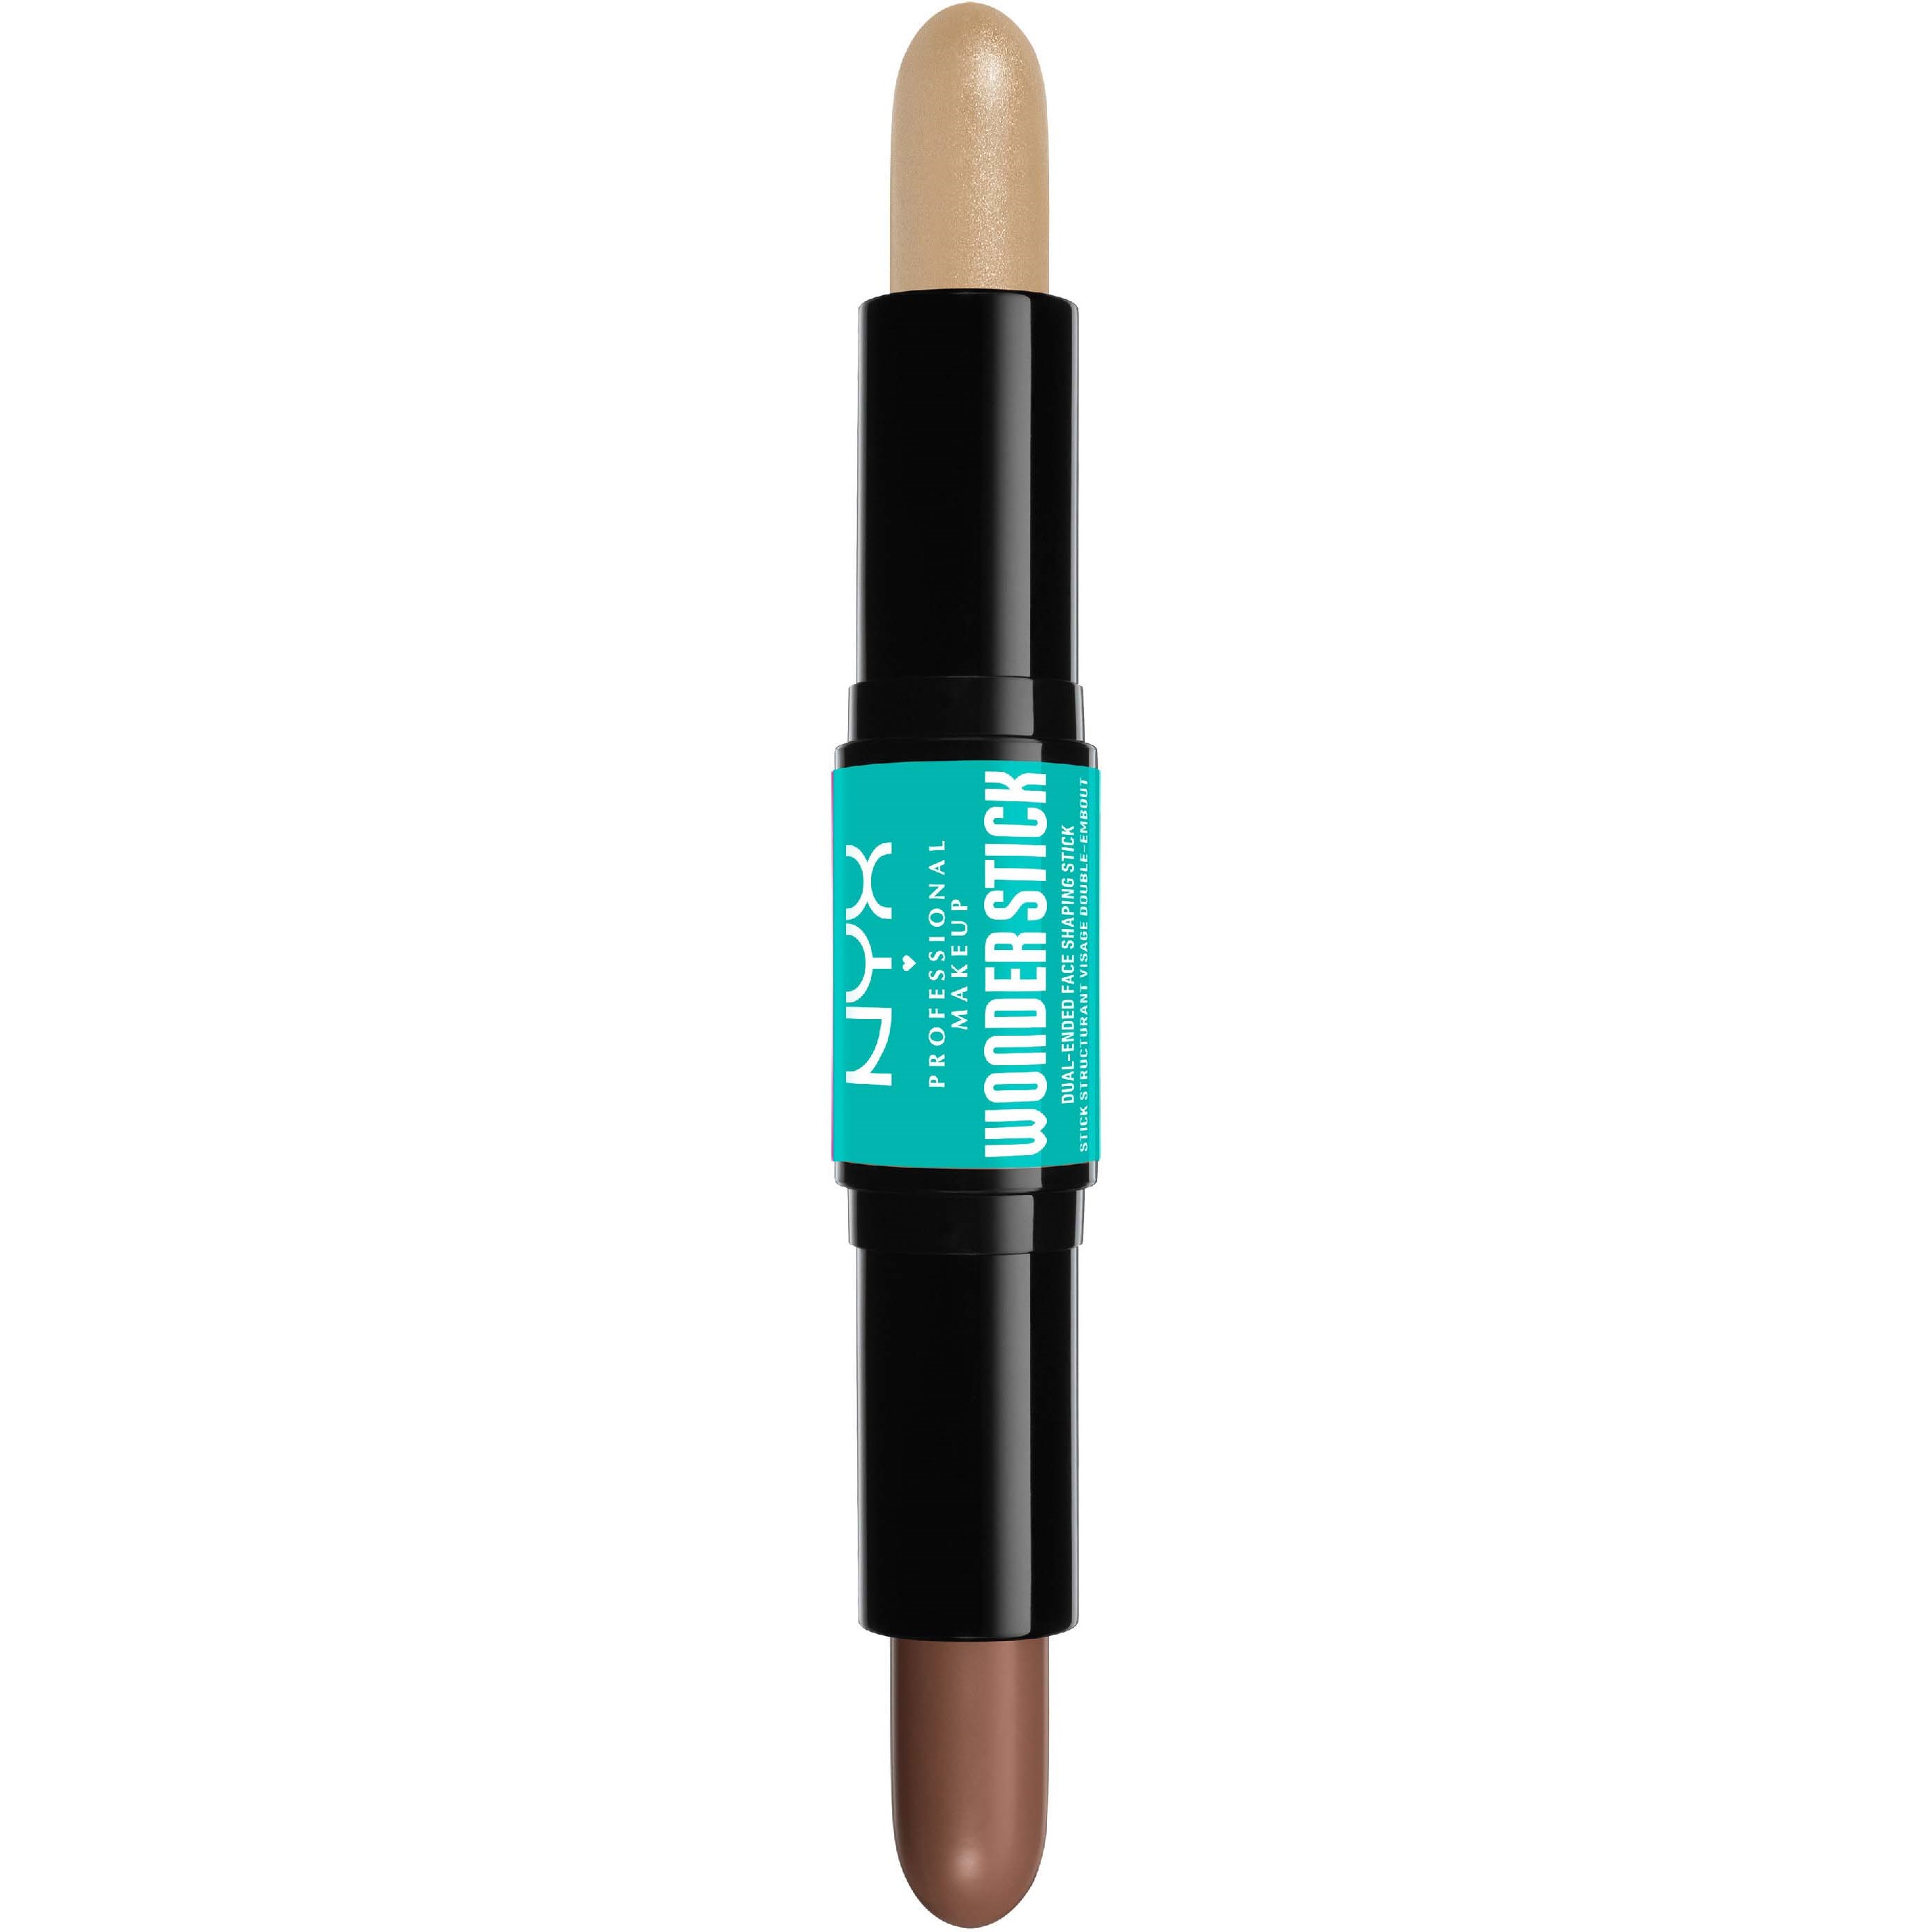 Läs mer om NYX PROFESSIONAL MAKEUP Wonder Stick Dual-Ended Face Shaping Stick 02